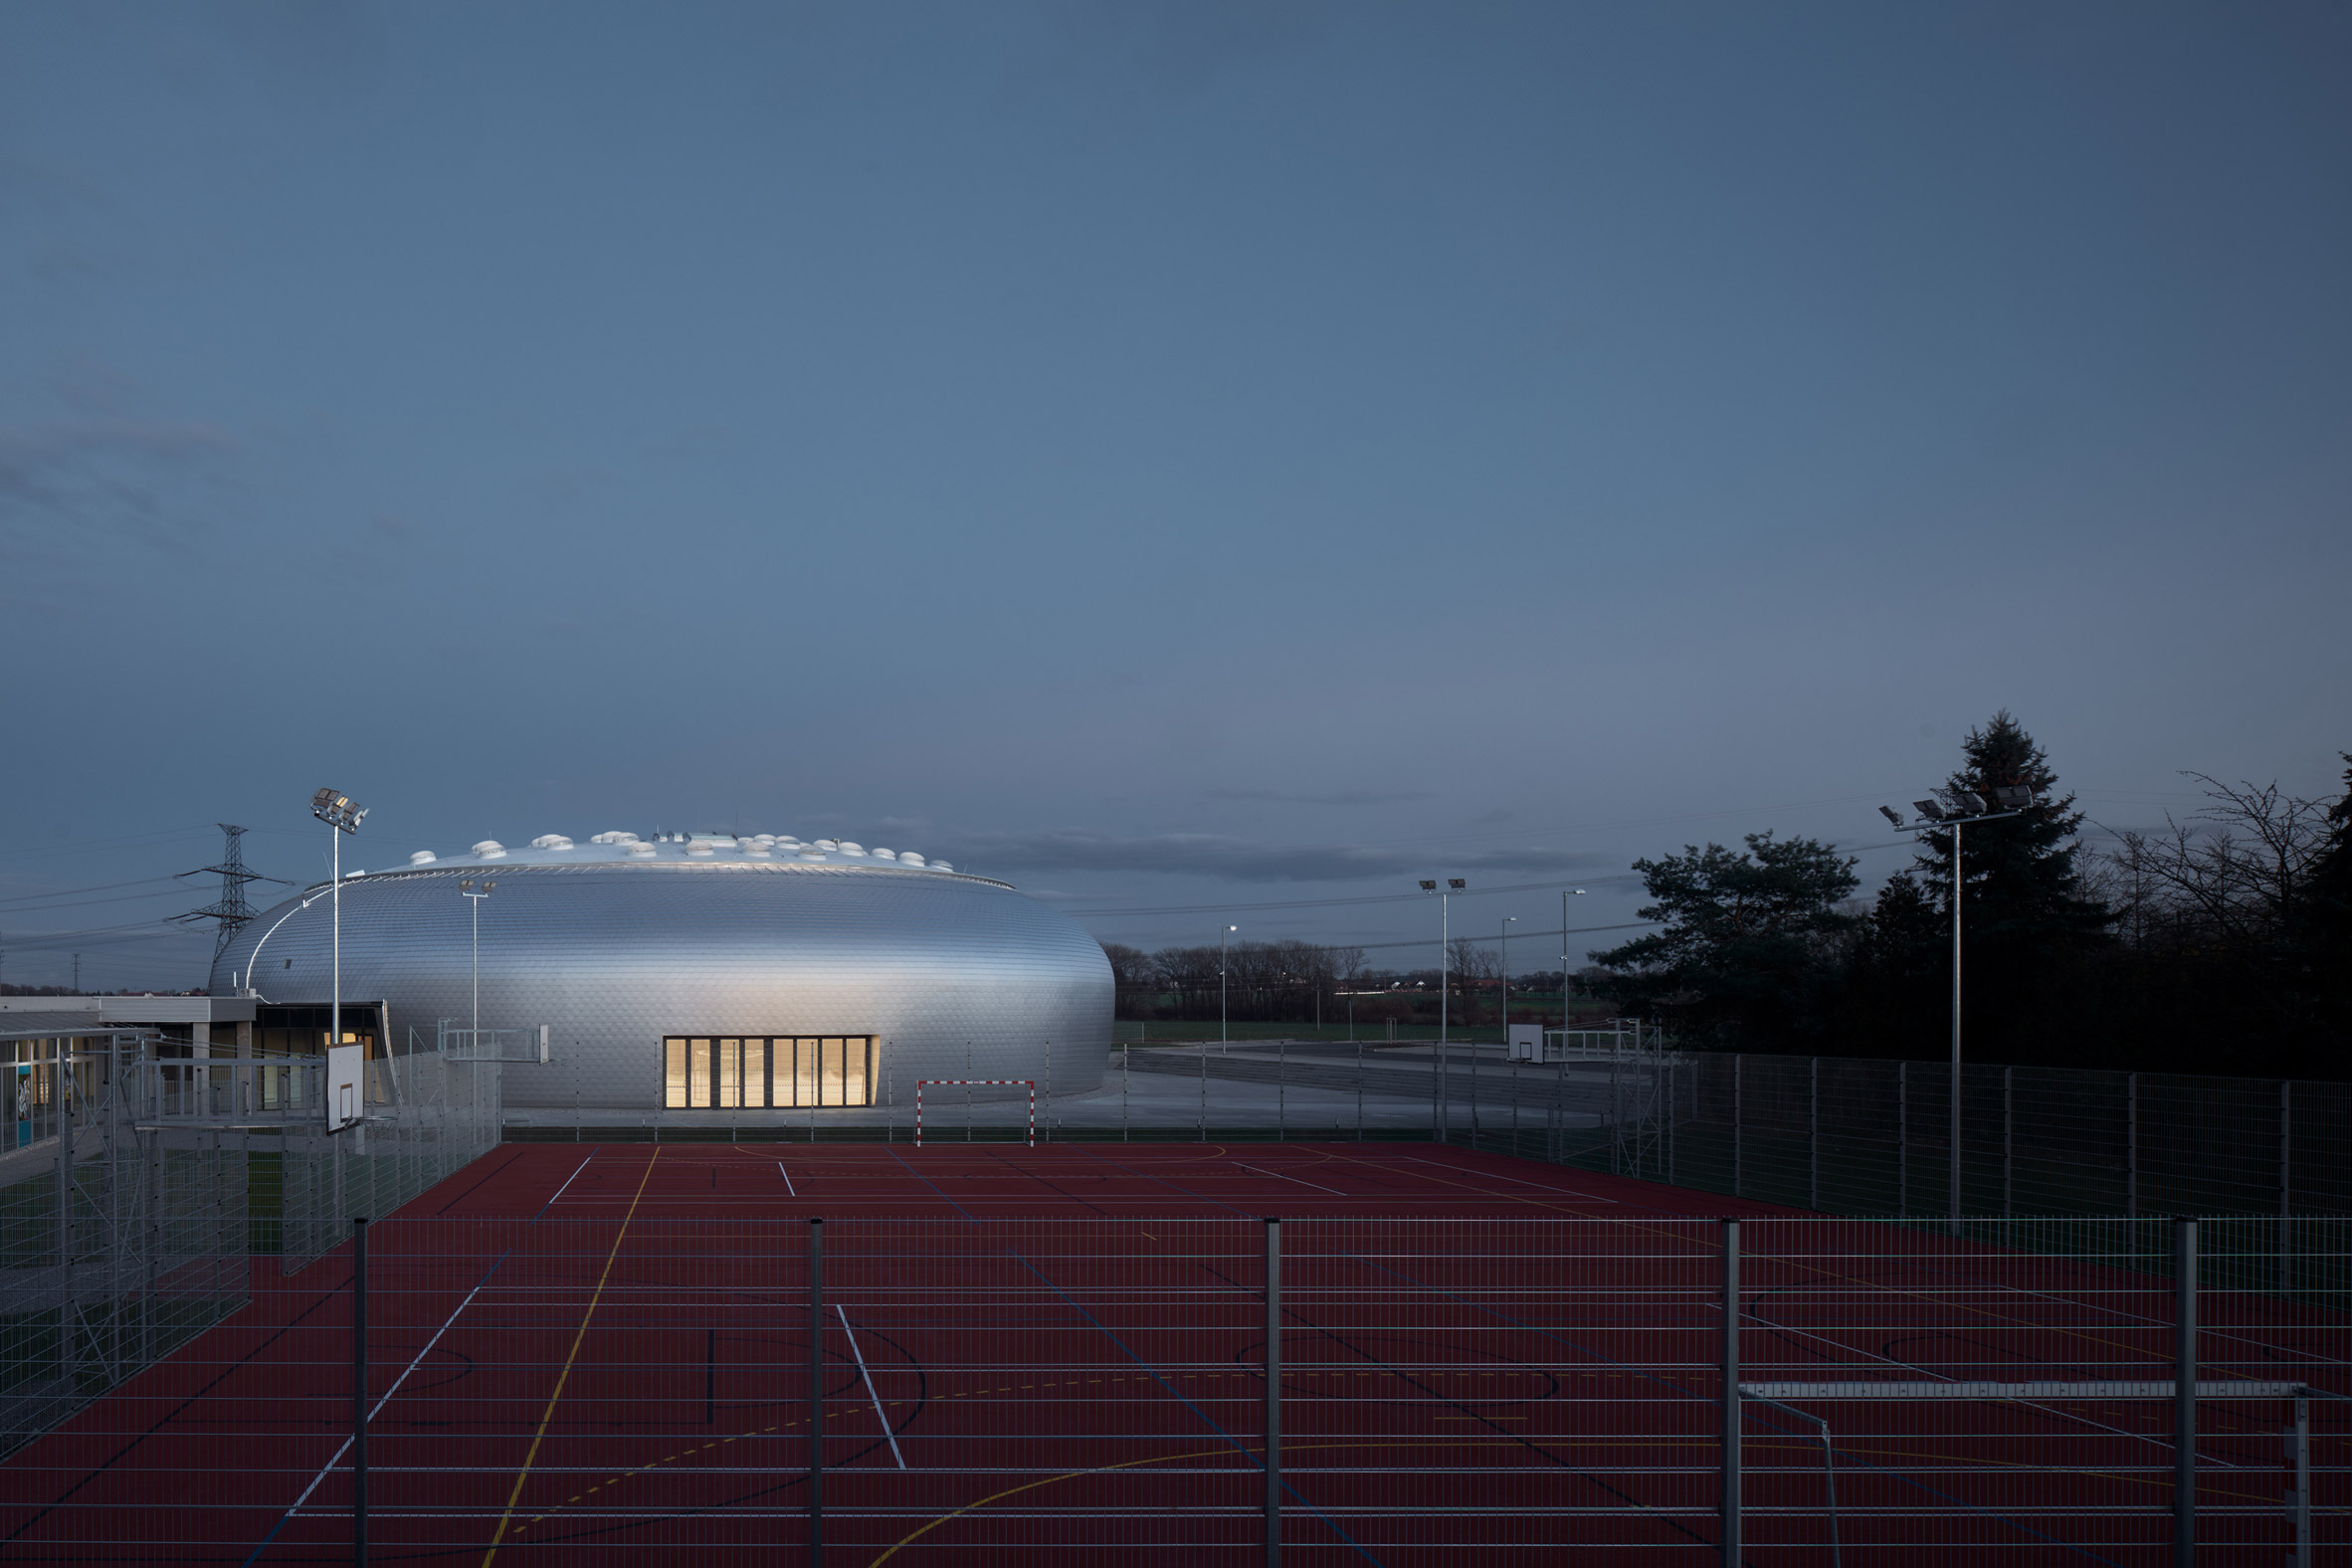 Domed sports hall by Sporadical is covered in scale-like aluminium shingles